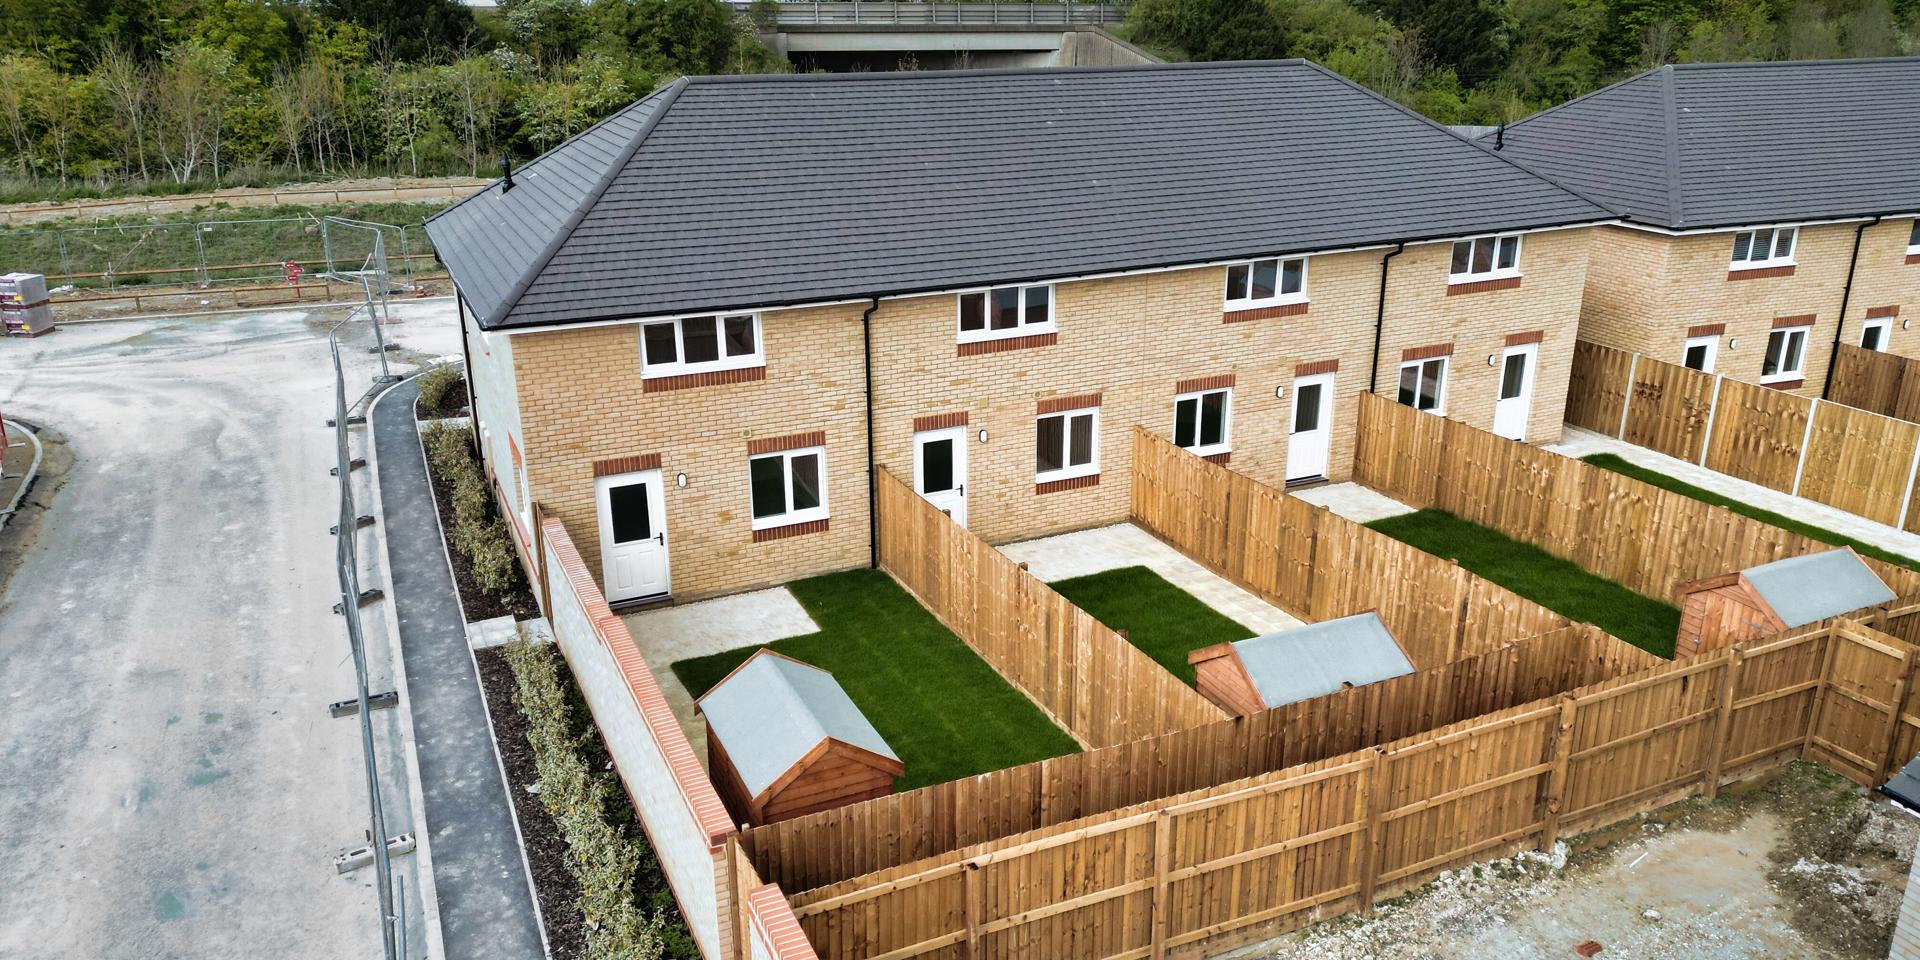 A birds-eye view of the rear gardens showing the sheds and patio areas